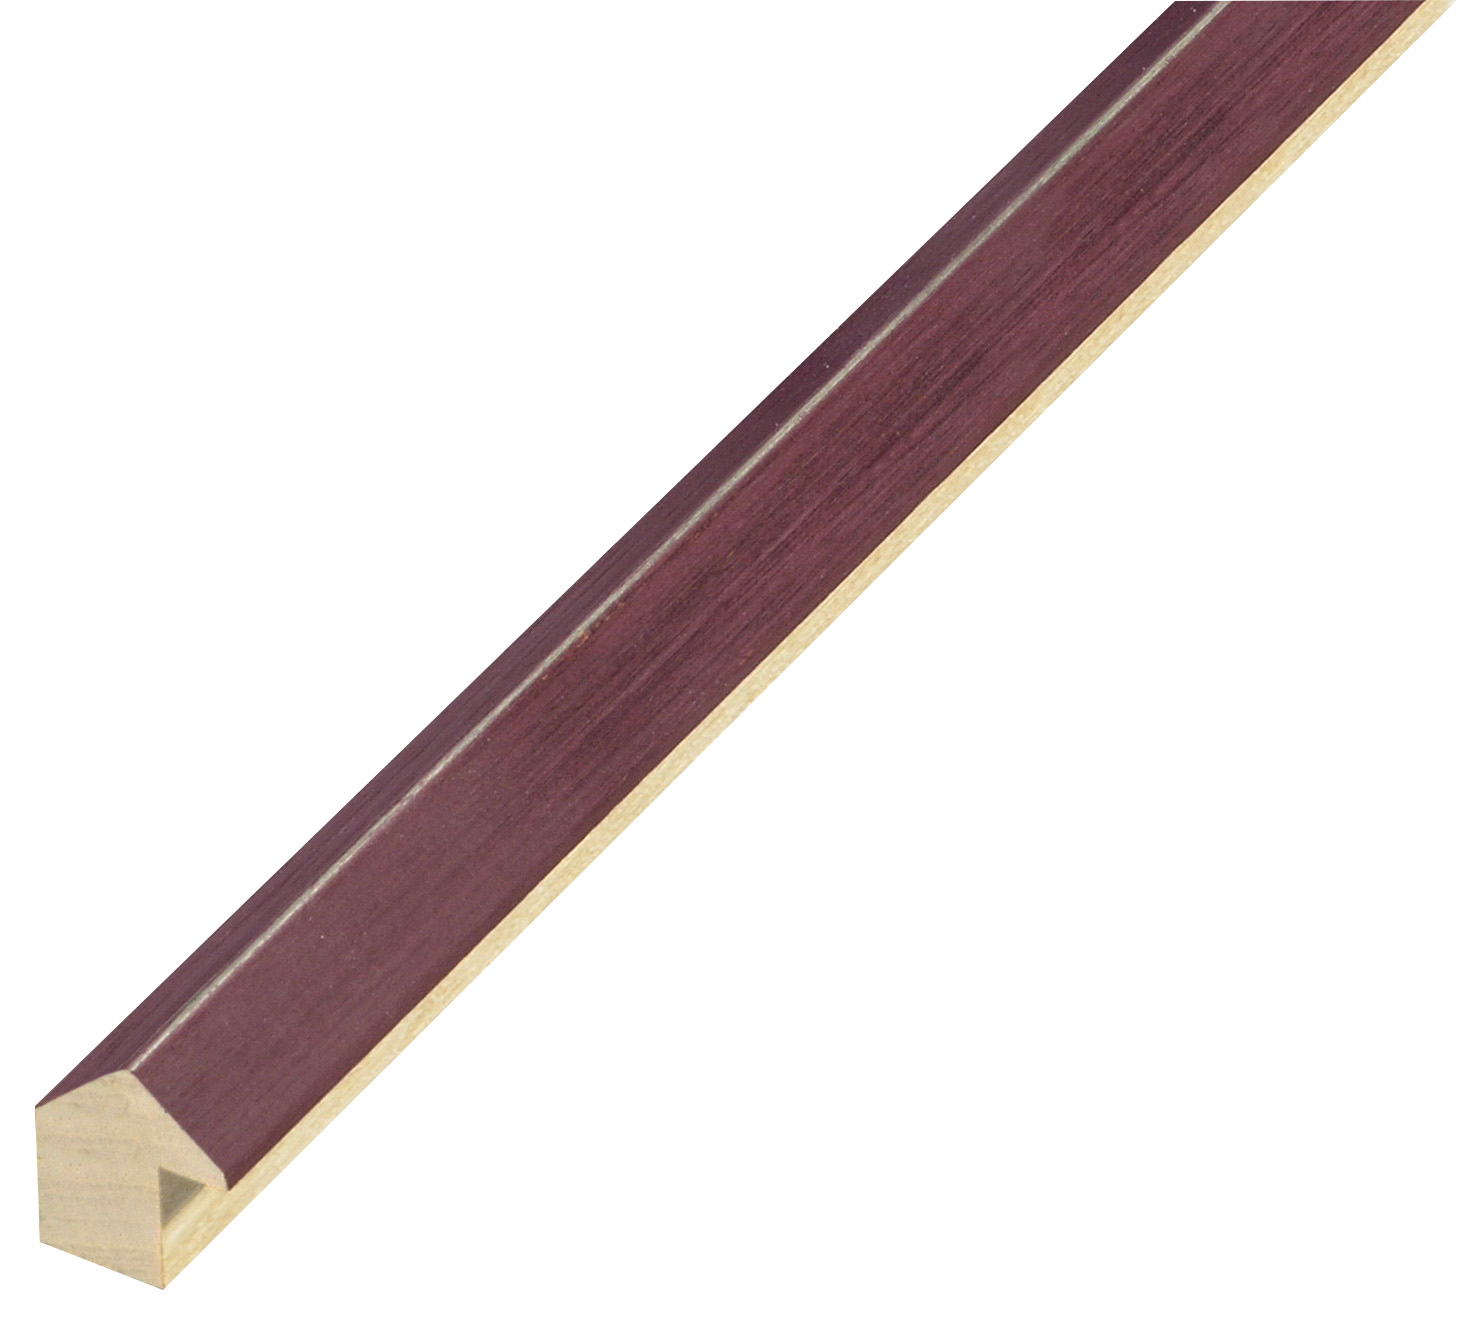 Moulding ayous - height 21mm - widht 18mm - plum